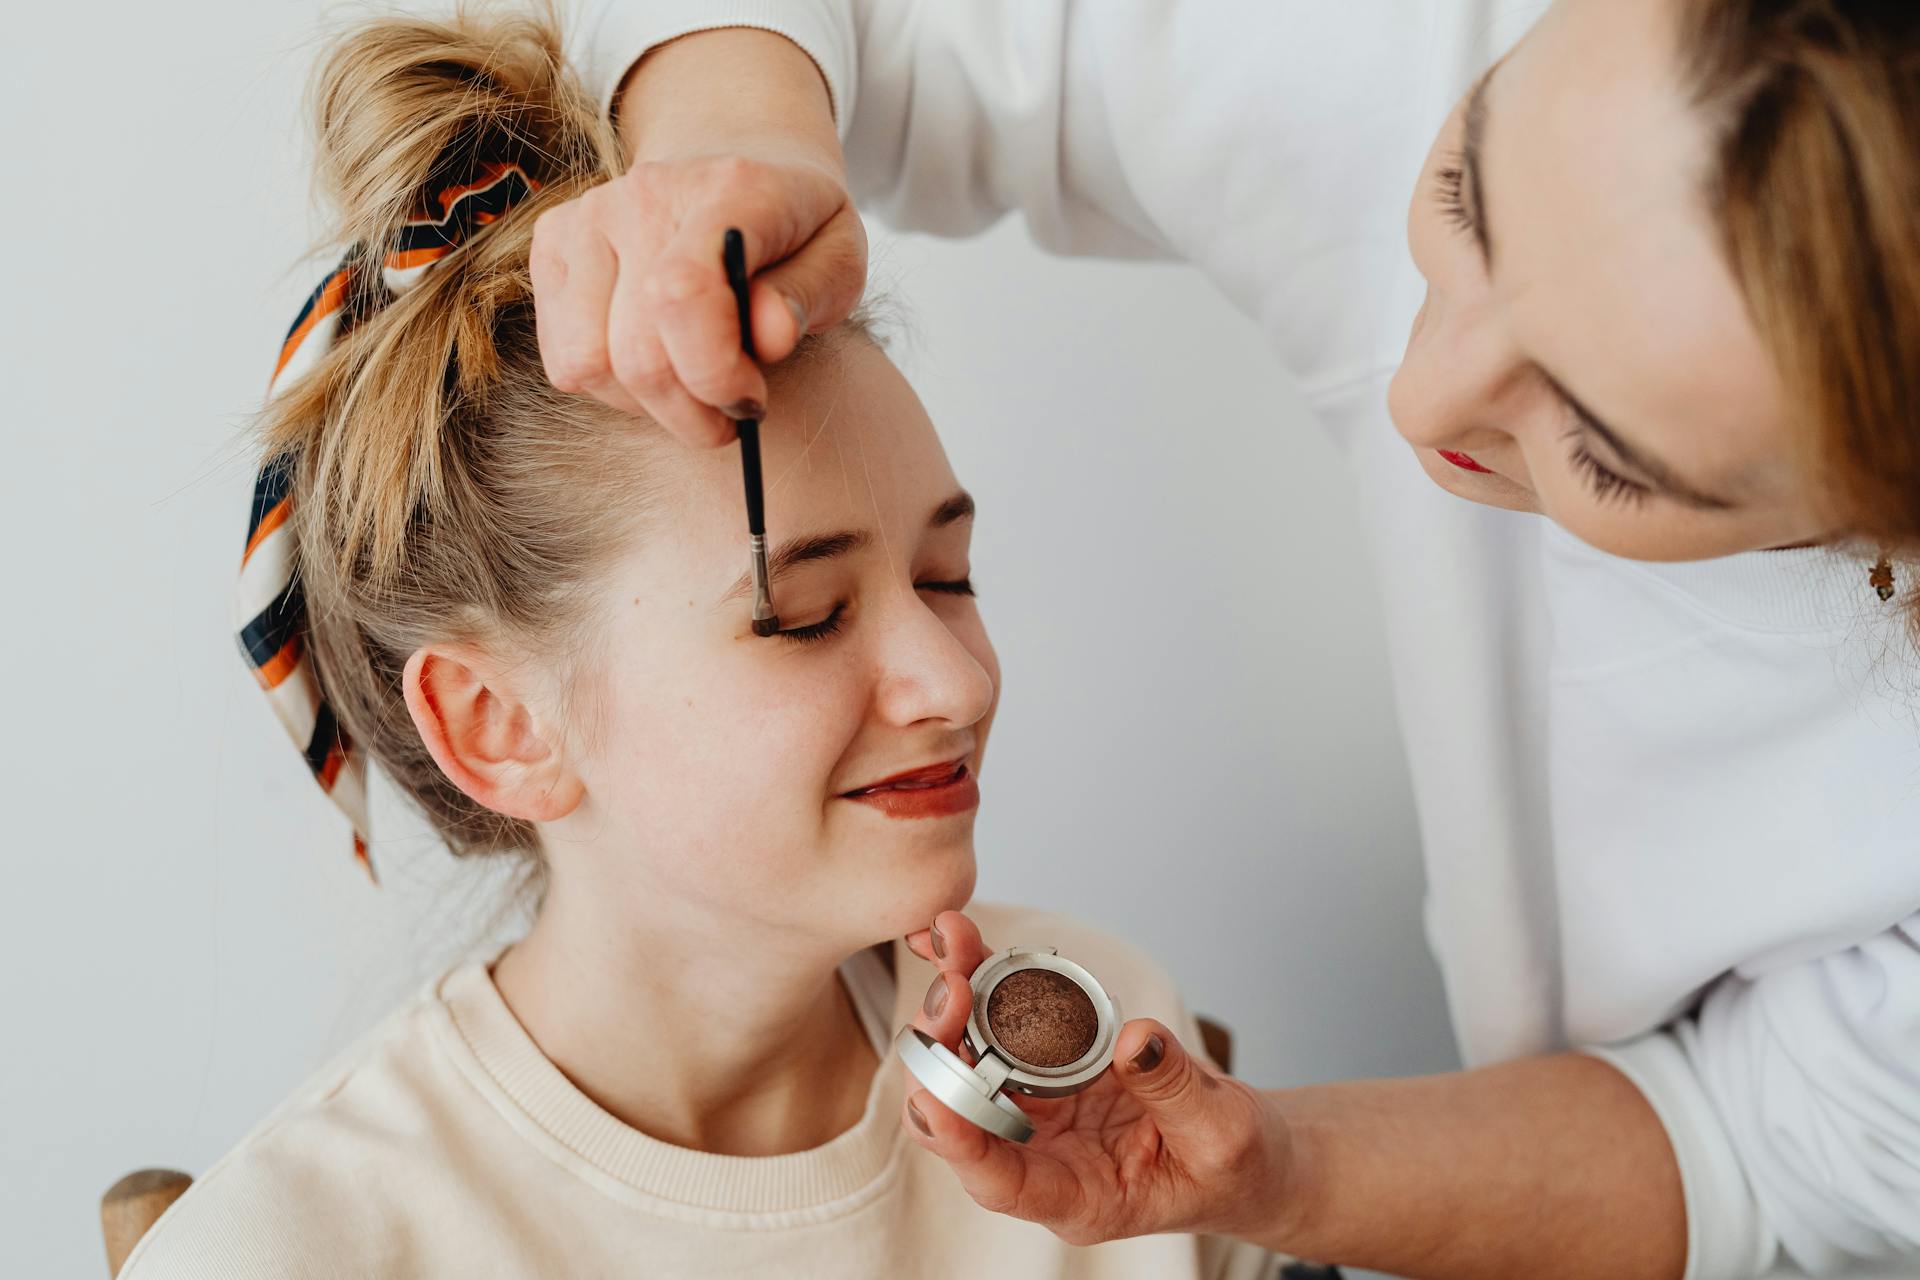 A person getting their make-up done | Source: Pexels